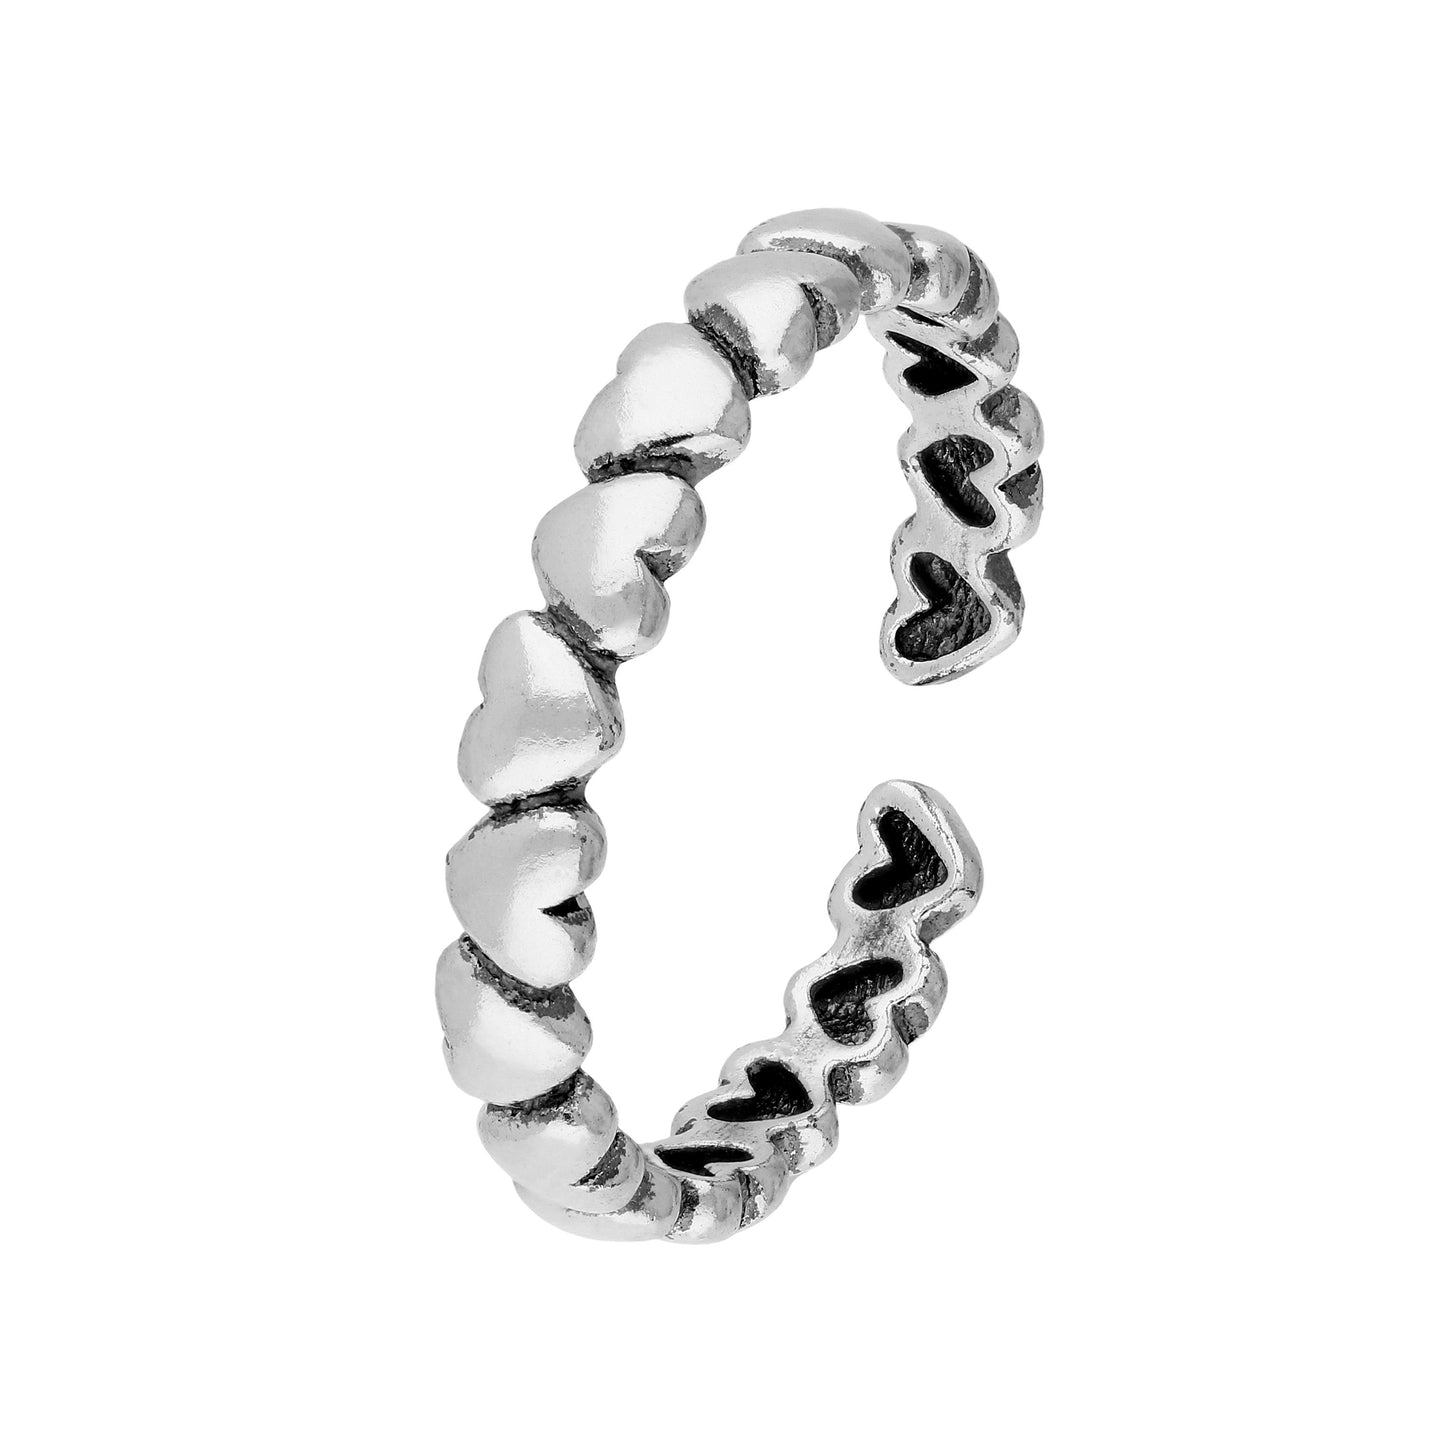 Sterling Silver Hearts Toe Ring